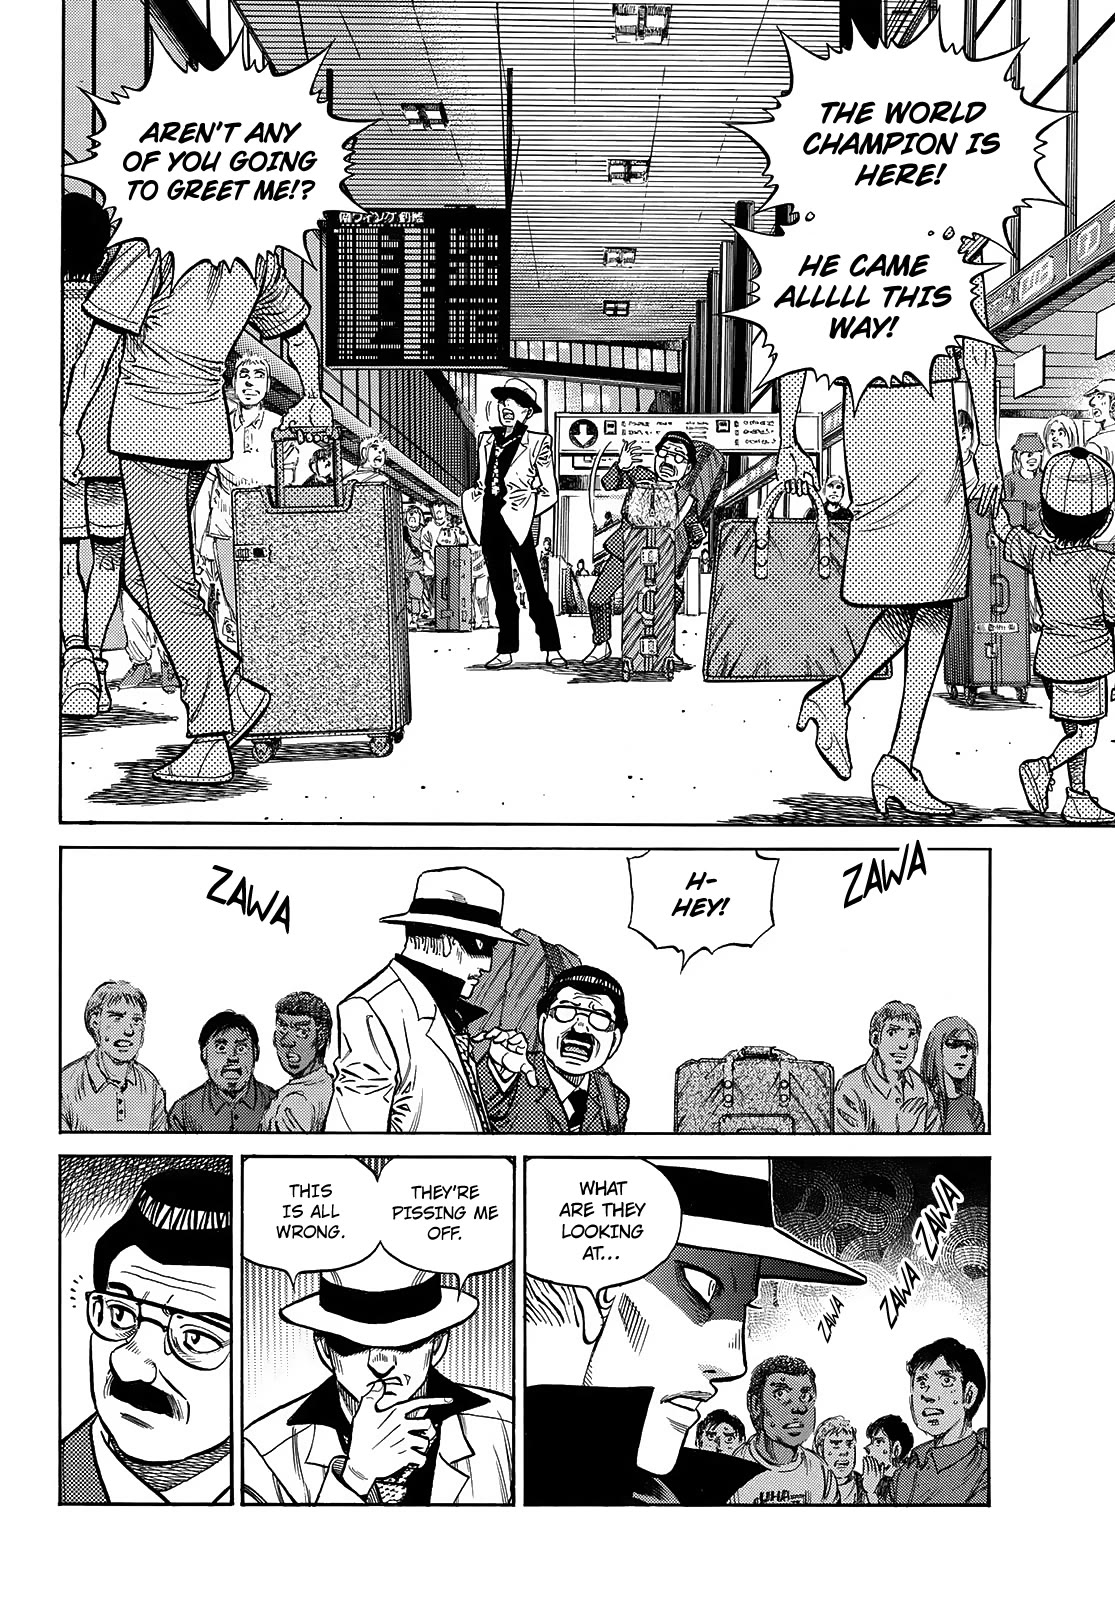 Hajime no Ippo, Chapter 1446 Round 1446 Rosario Arrives in Japan image 07